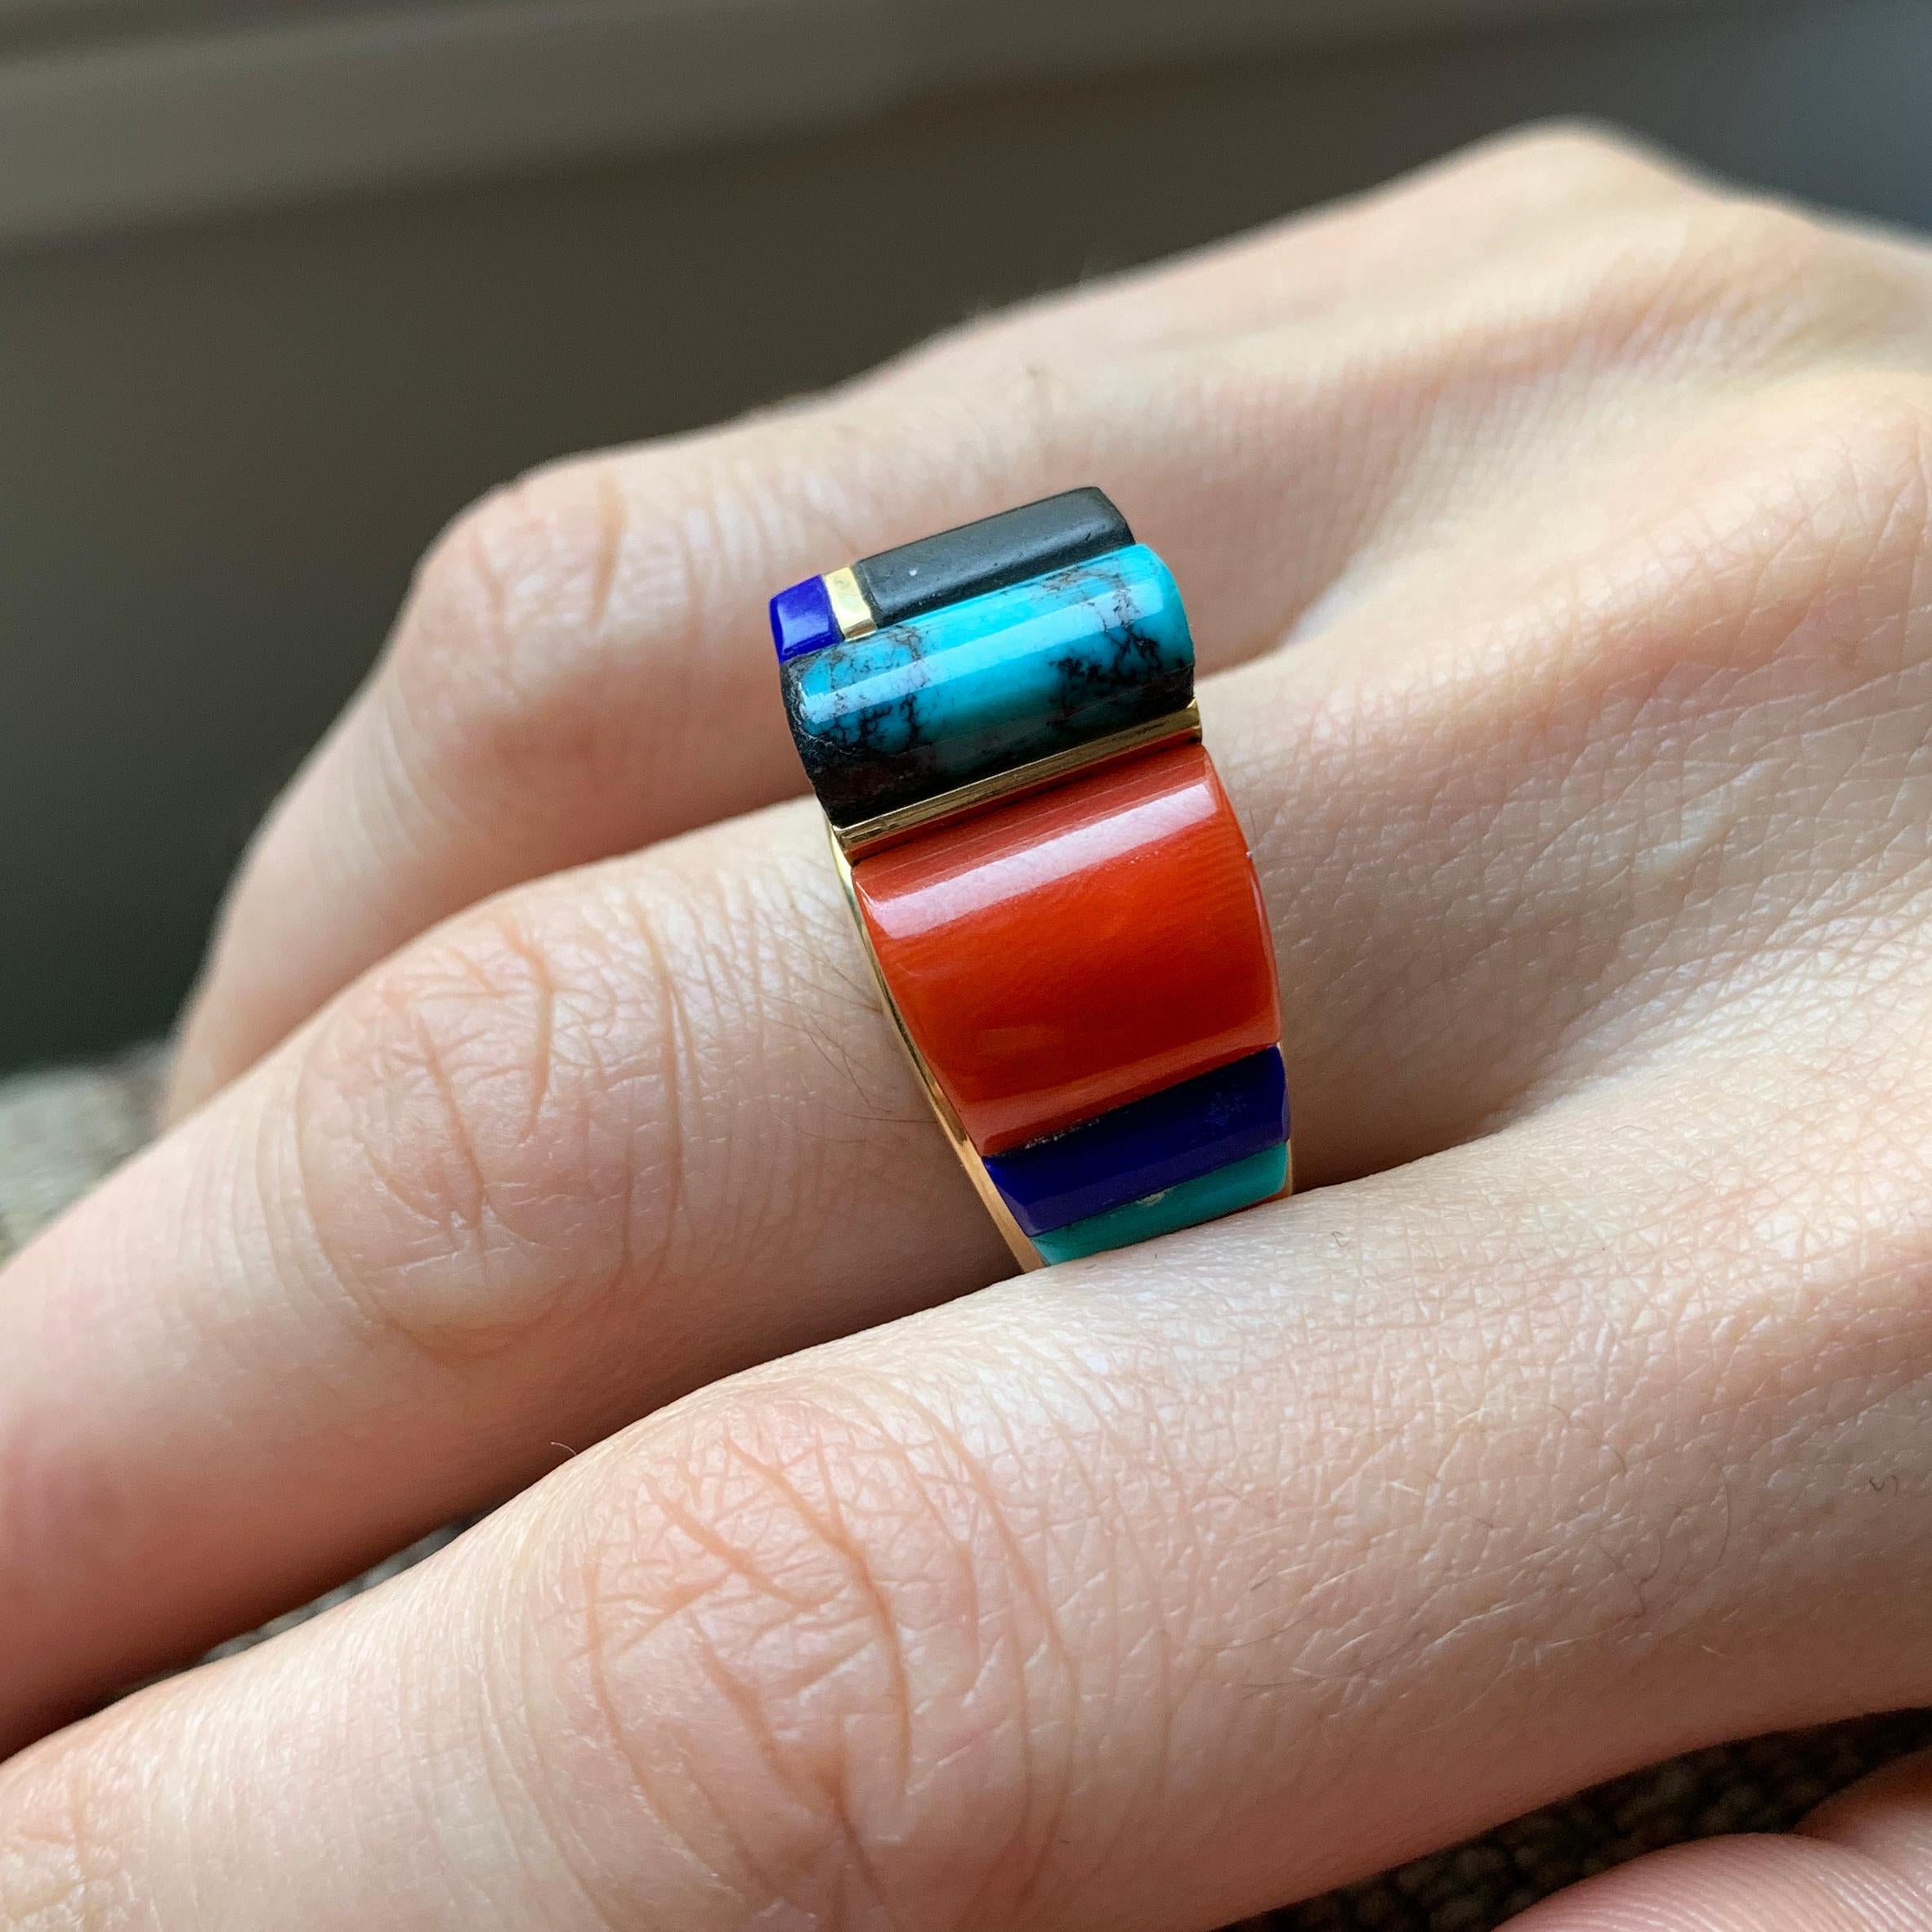 This is a coral, lapis lazuli, turquoise, wood and 18 karat gold height inlay ring, by Hopi master jeweler, Verma Nequatewa (Sonwai). The Heard Museum in Phoenix, Arizona launched the first solo retrospective exhibition of her work in 2018 titled